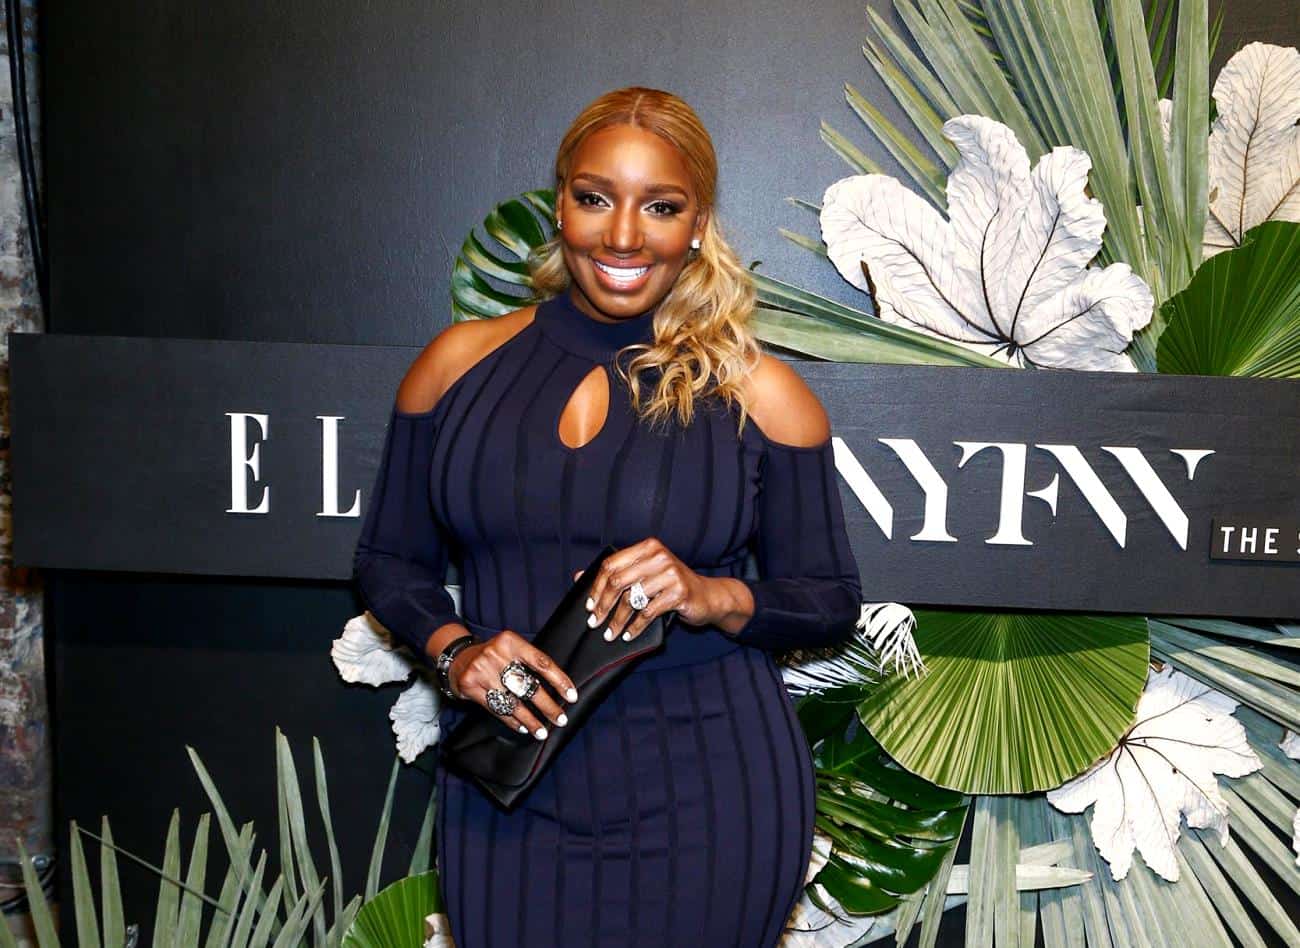 Nene Leakes Announces She's Appearing on a New Reality Show on TBS, Is She Done With RHOA?